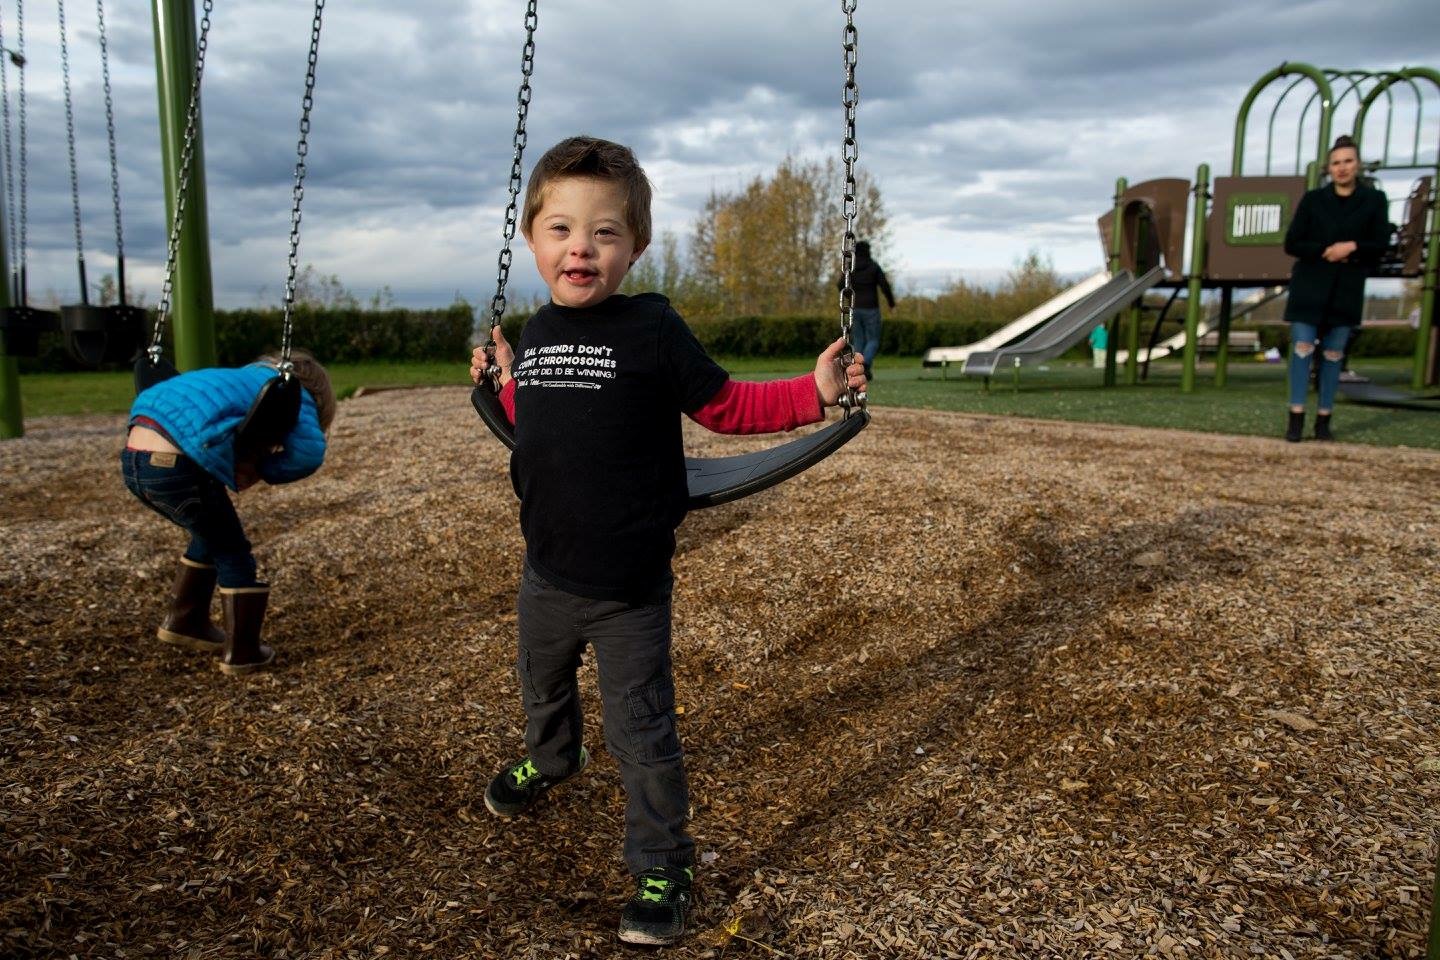 Two children are at a playground swinging on the swings